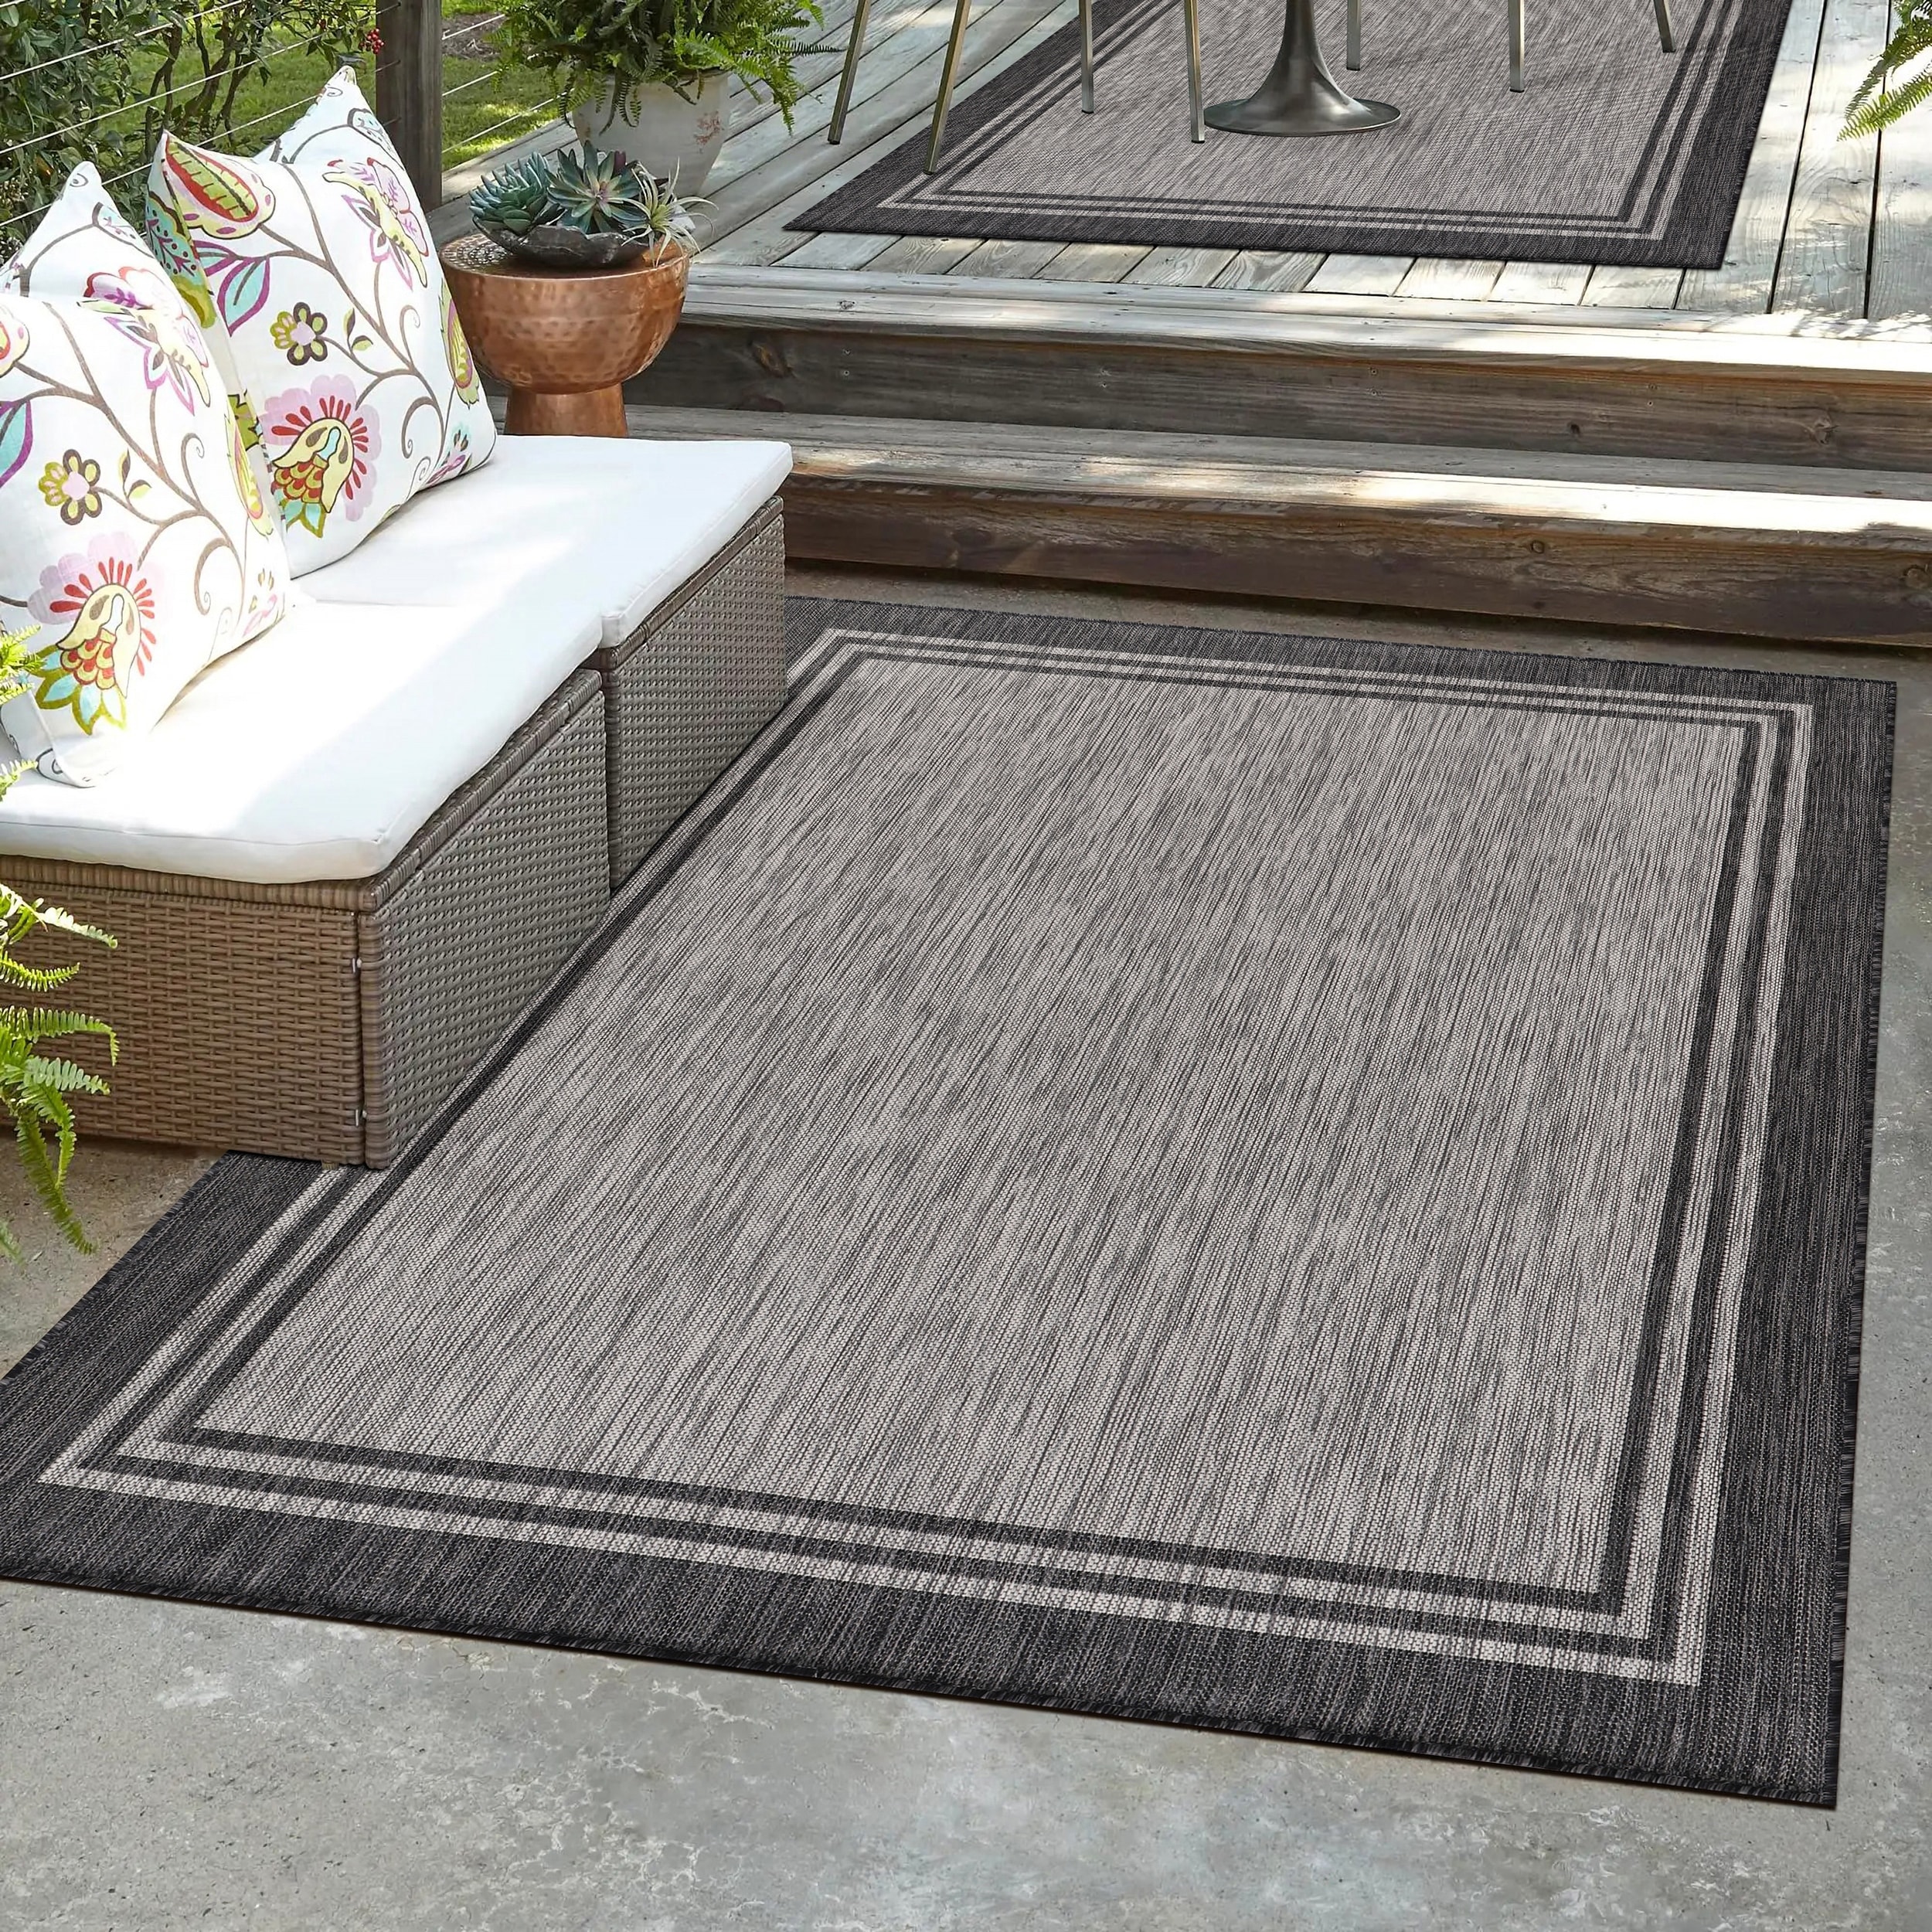 https://ak1.ostkcdn.com/images/products/is/images/direct/21758c6ddcb51825846da3d5d27348a6199ccd0a/Washable-Bordered-Indoor-Outdoor-Rug%2C-Outside-Carpet-for-Patio%2C-Deck%2C-Porch.jpg